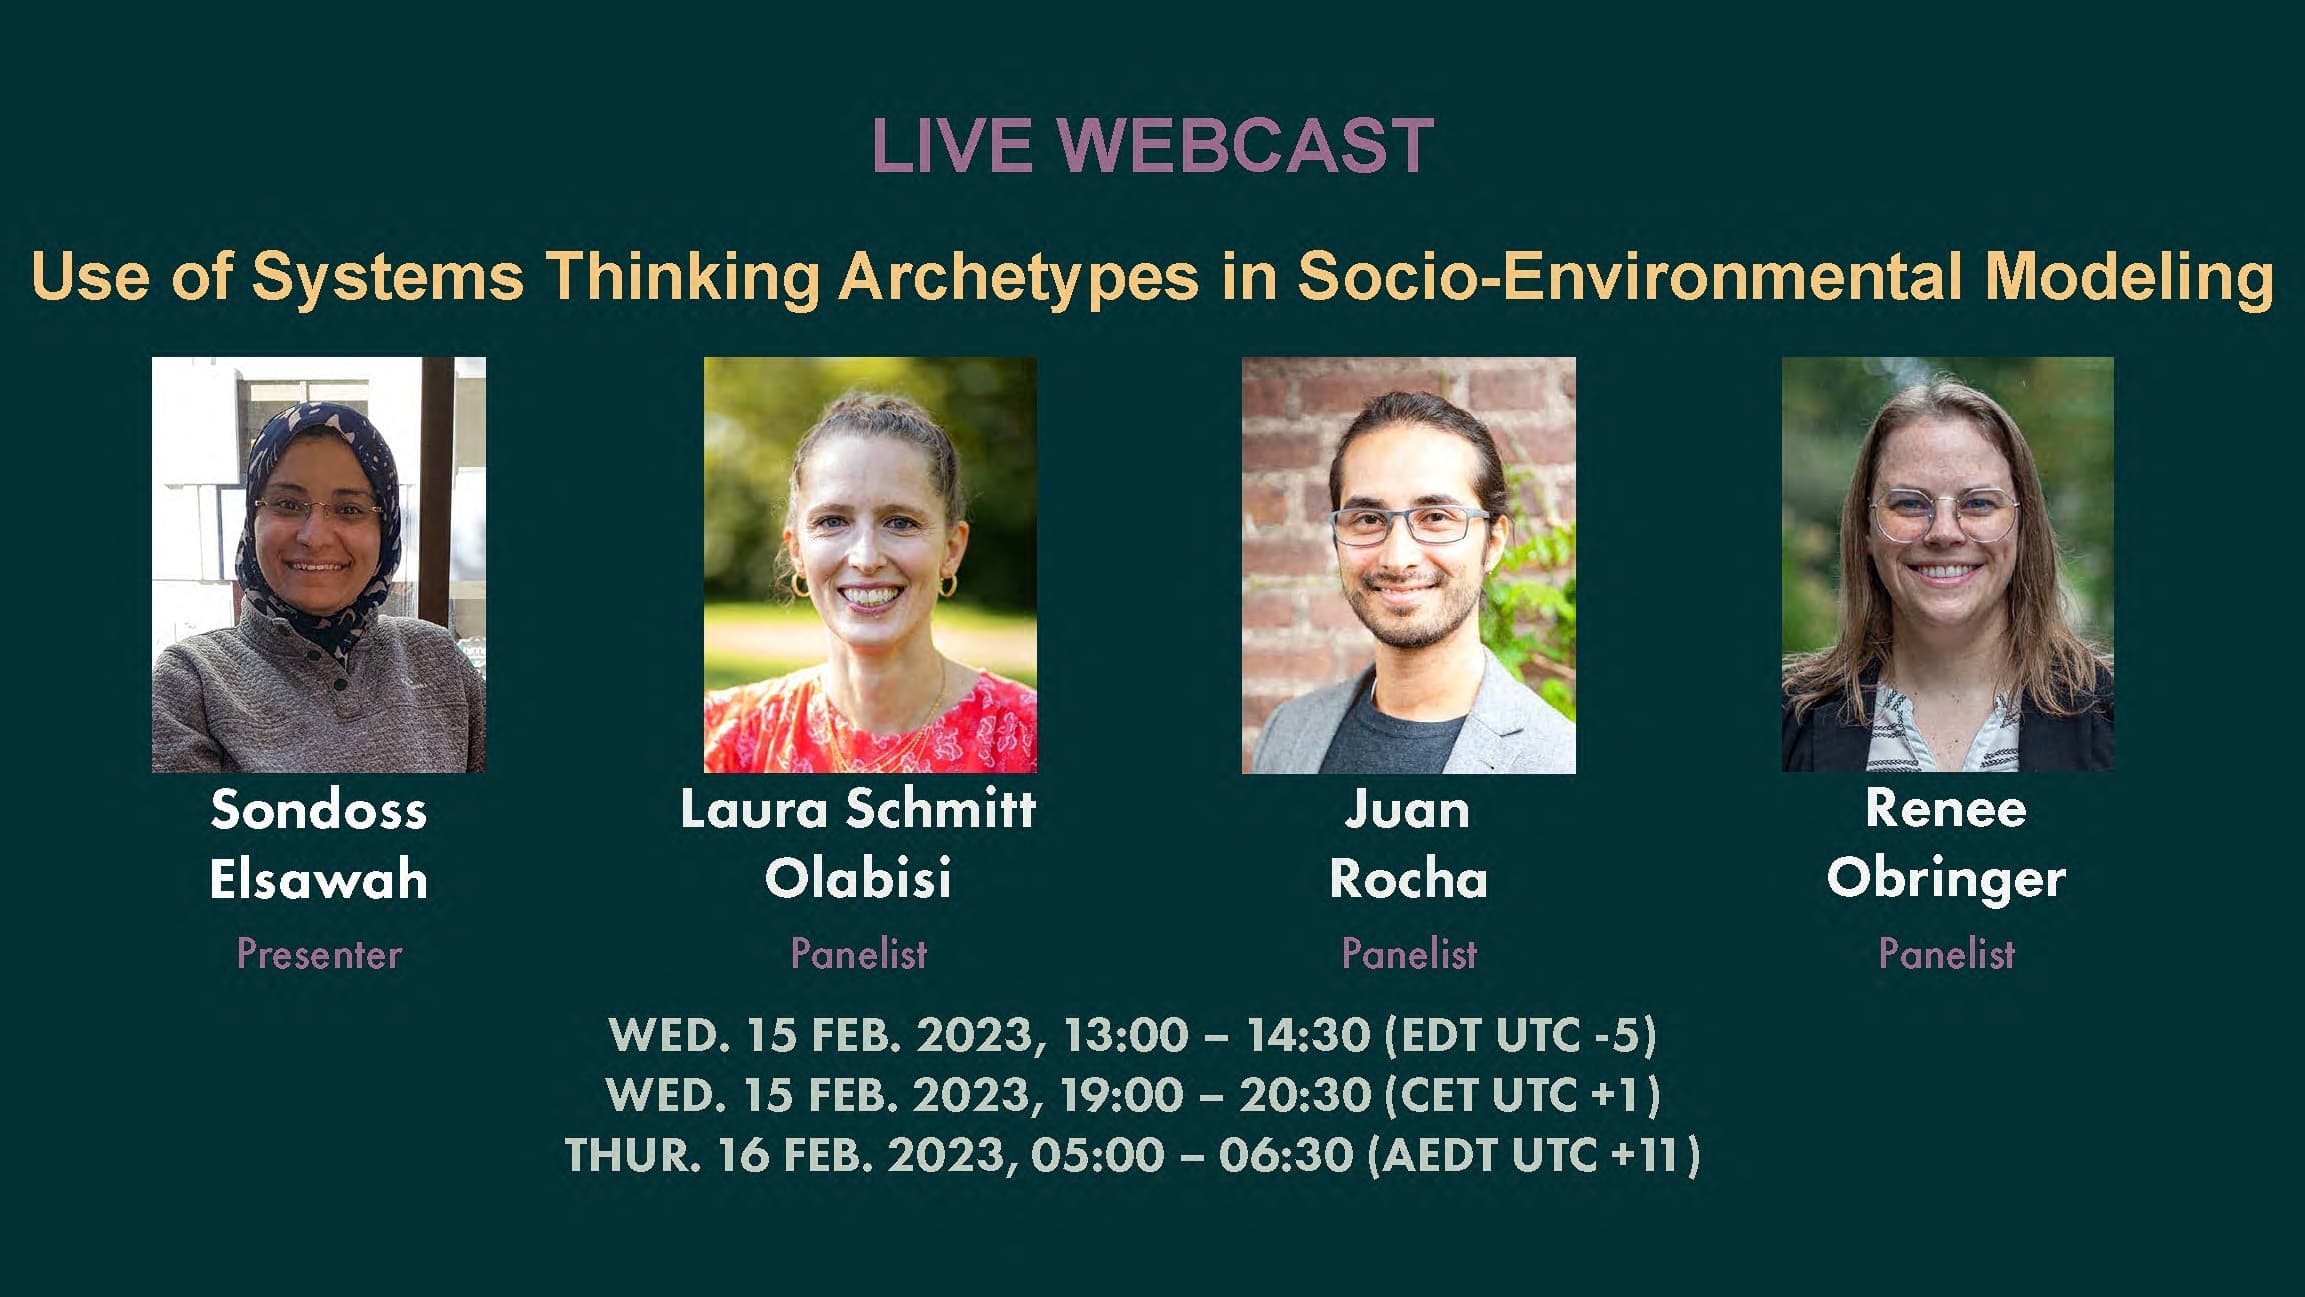 An image showing photos of the four speakers, Sondoss Elsawah, Laura Schmitt Olabisi, Juan Roch, and Renee Obringer with the text: Live Webcast, Use of Systems Thinking Archetypes in Socio-Environmental Modeling